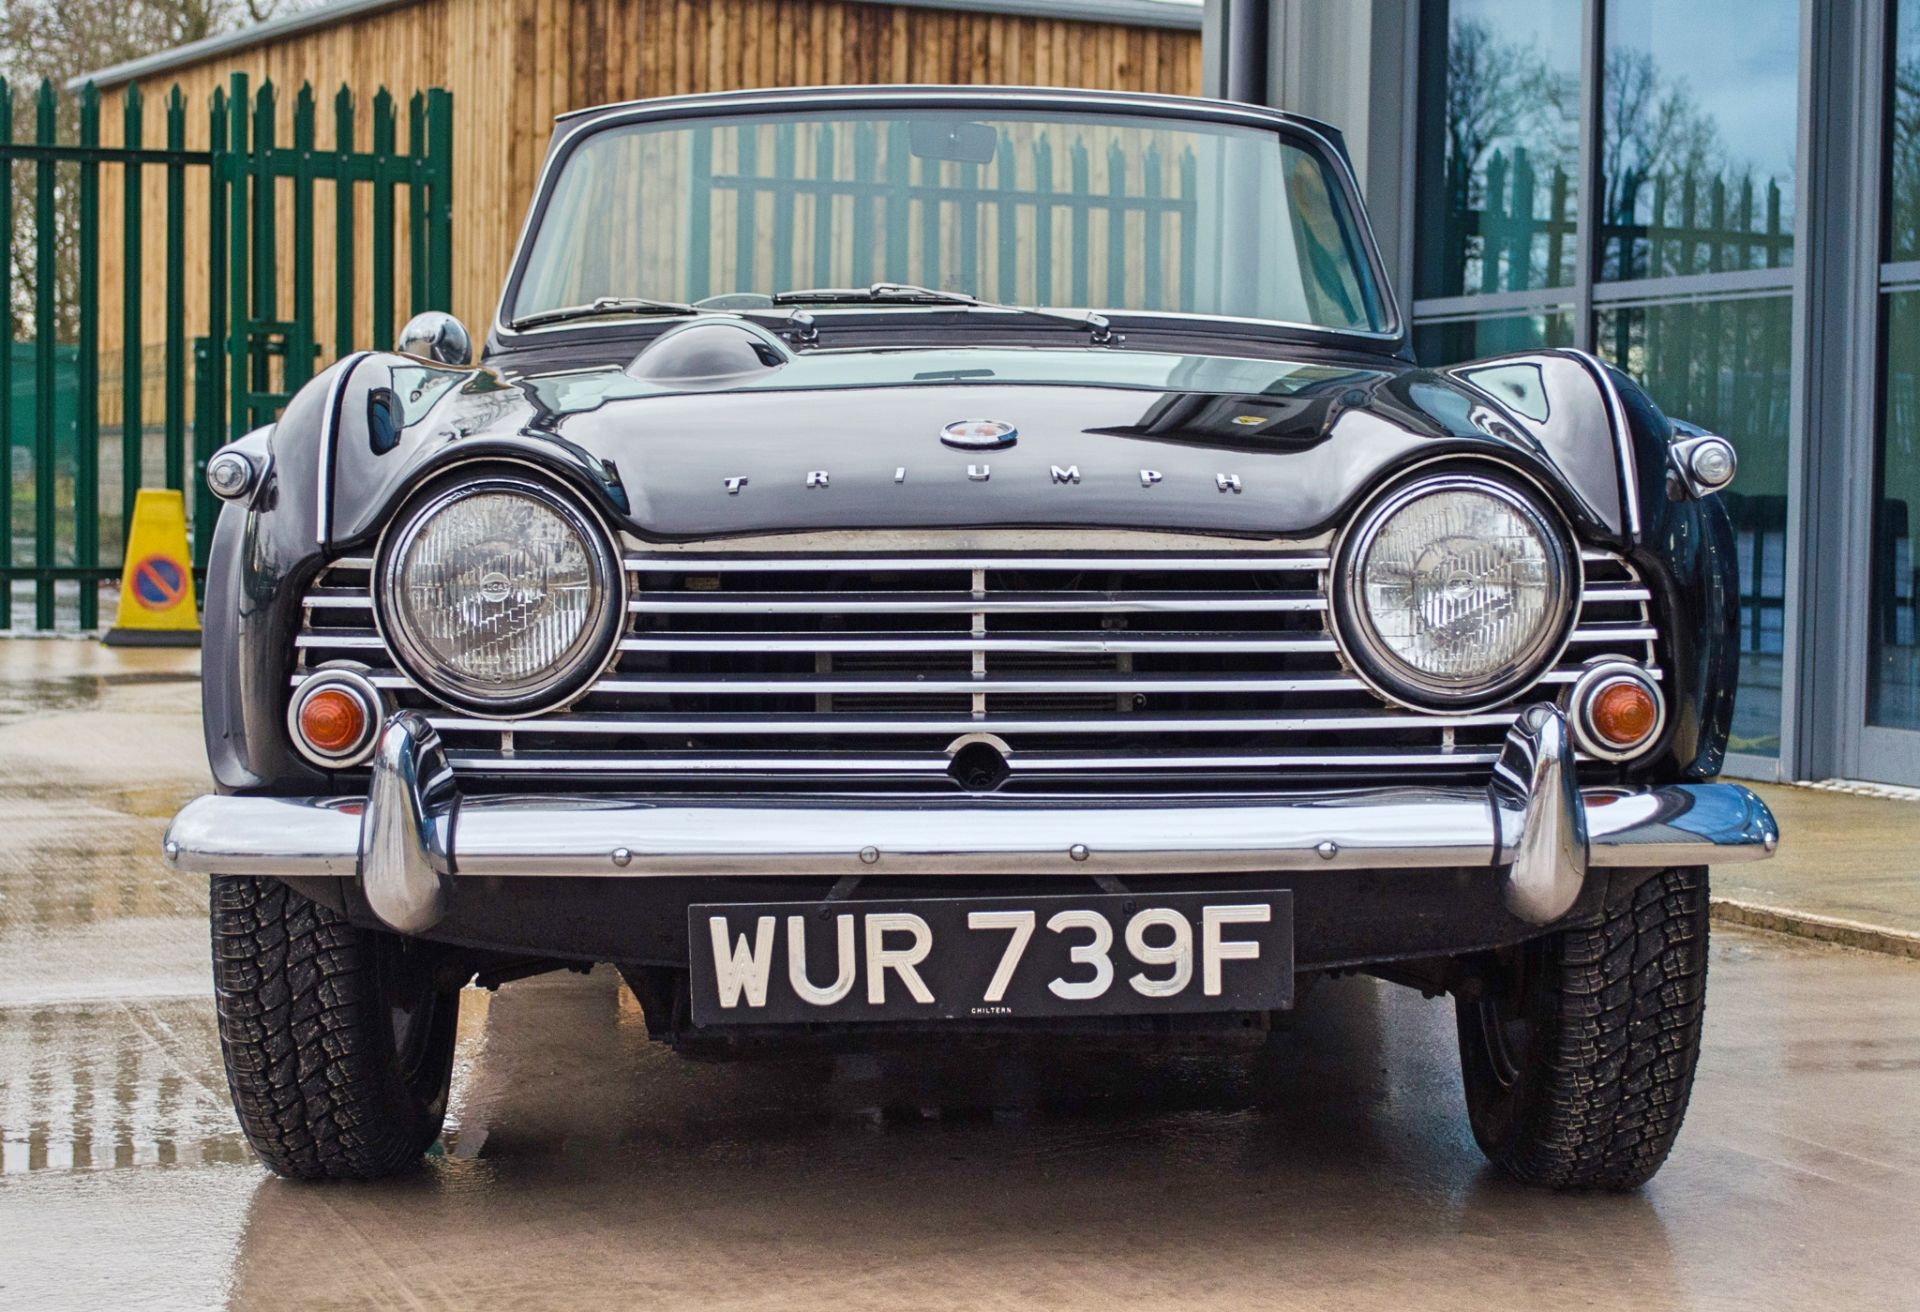 1967 Triumph TR4A IRS 2135cc convertible - Image 9 of 56